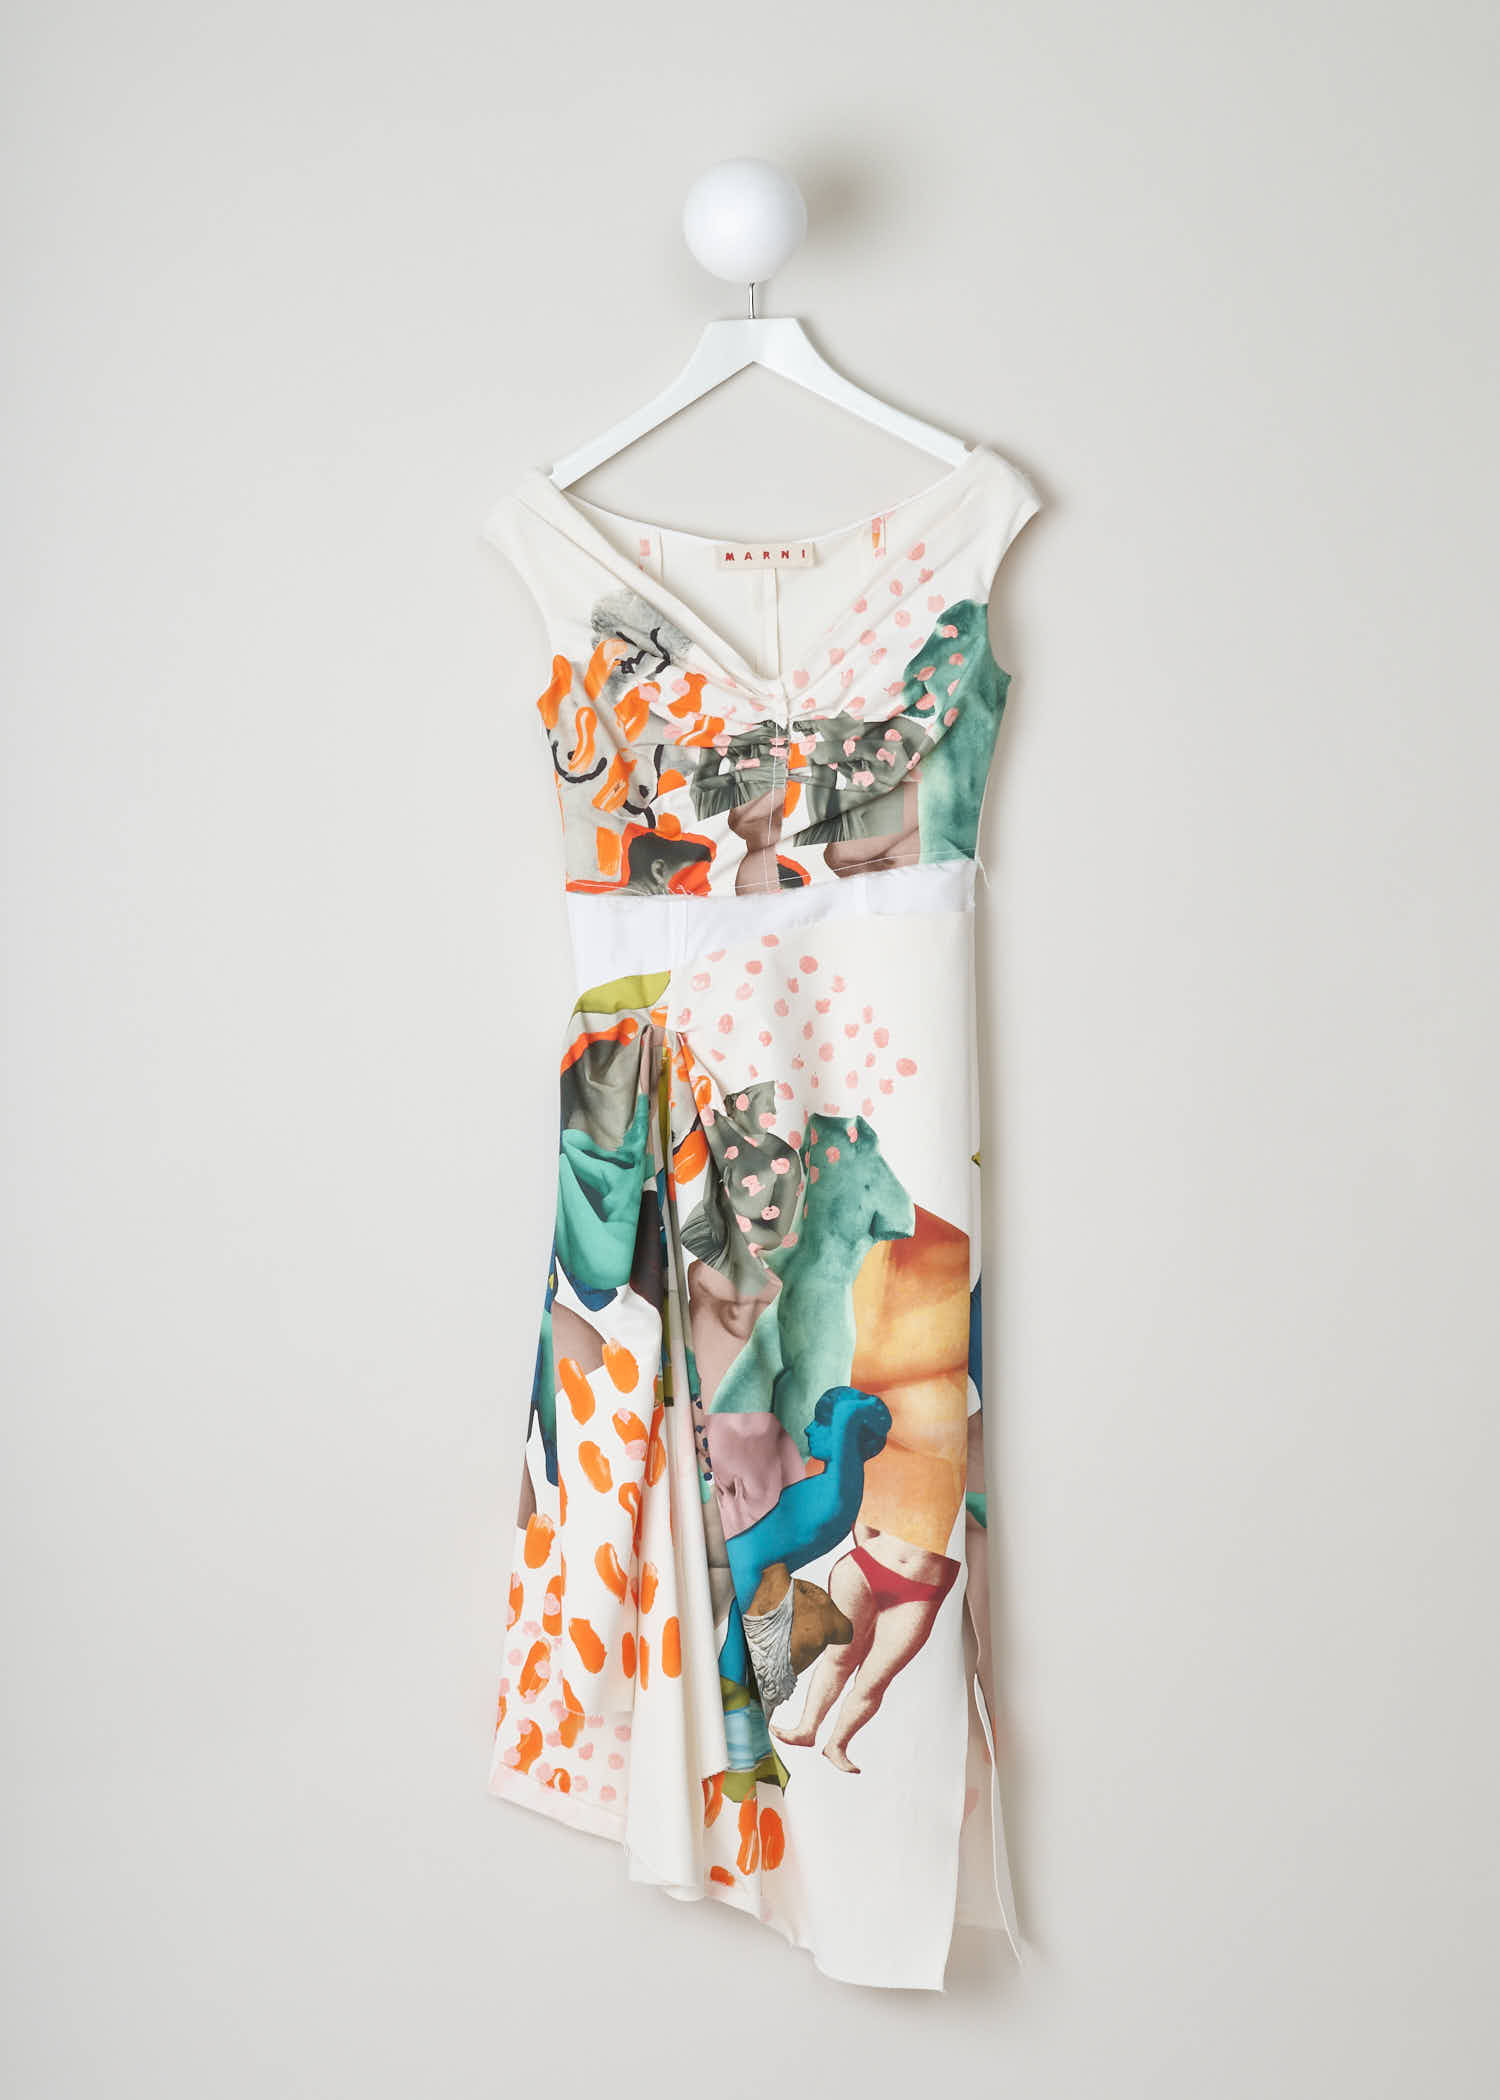 Marni venere print dress ABMA0336QY_TCX91_Y5589 pearl lily white front. Sleeveless mid-length with gathering V-neck collar, detachable drawstring at waist, zip closure at side-seam and a symmetric hem.